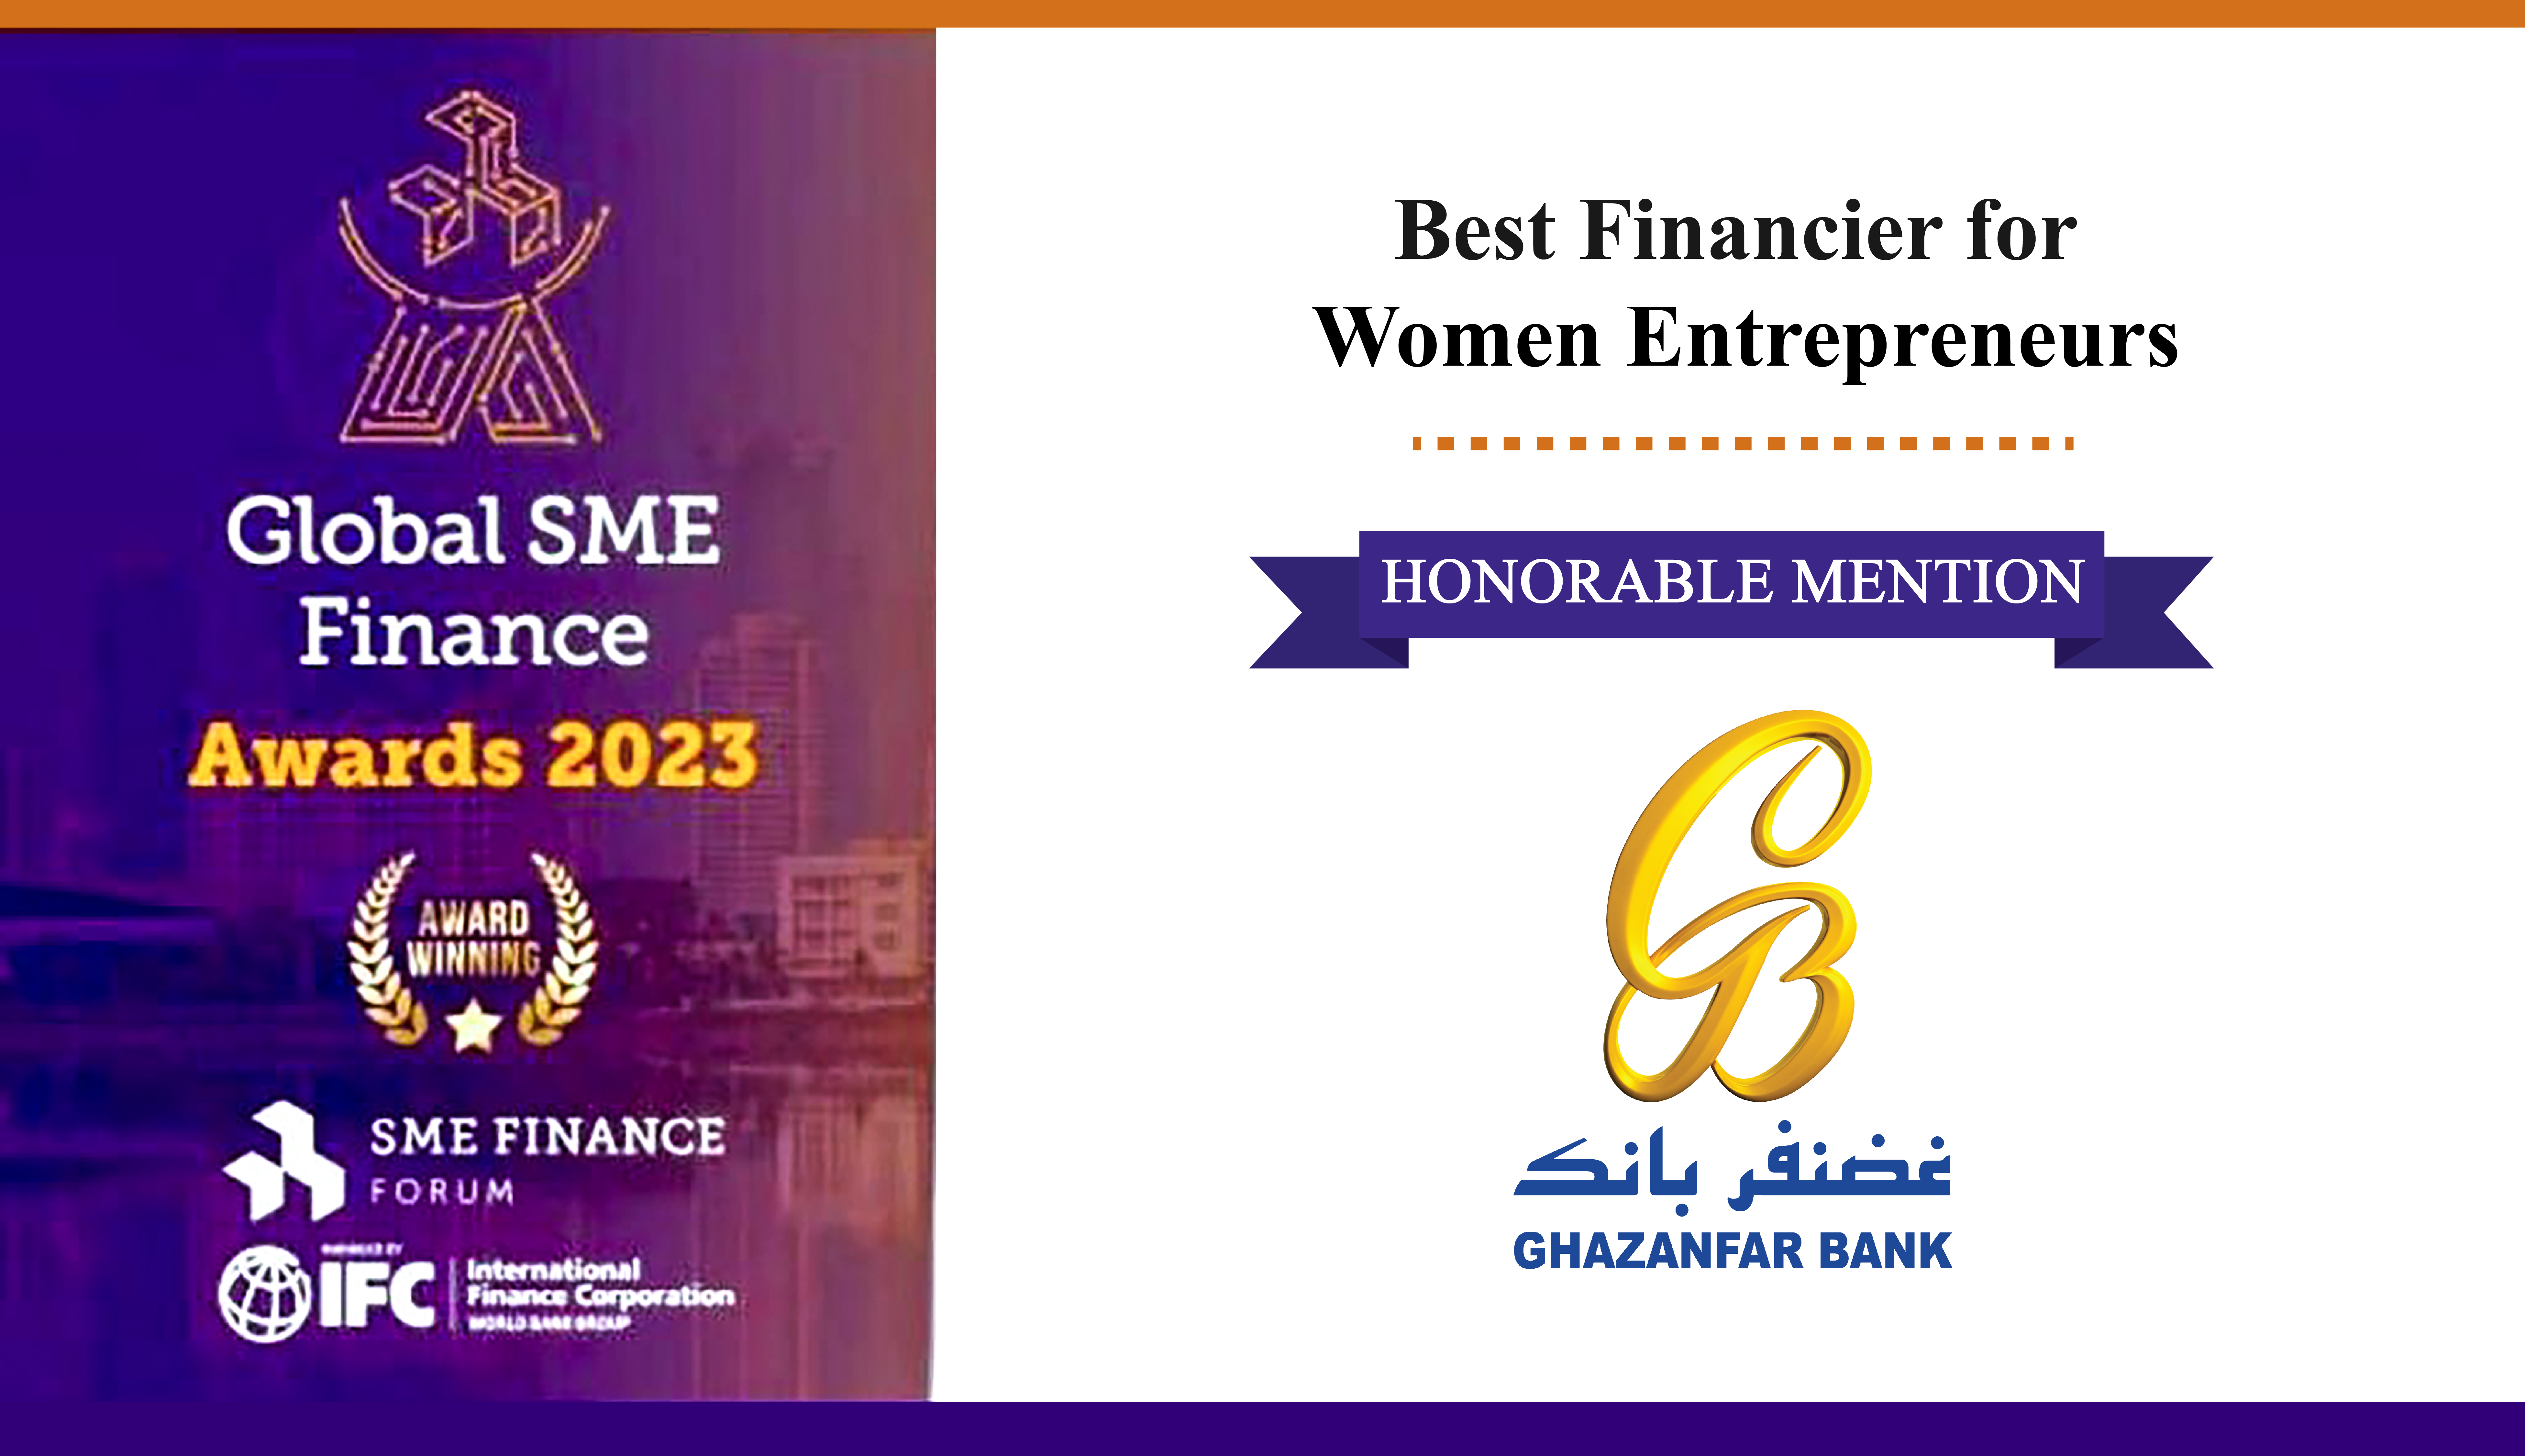 We are proud to announce that Ghazanfar Bank has been recognized by the SME Finance Forum with an Honorable Mention in the Best Financier for Women Entrepreneurs category of the Global SME Finance Awards 2023.